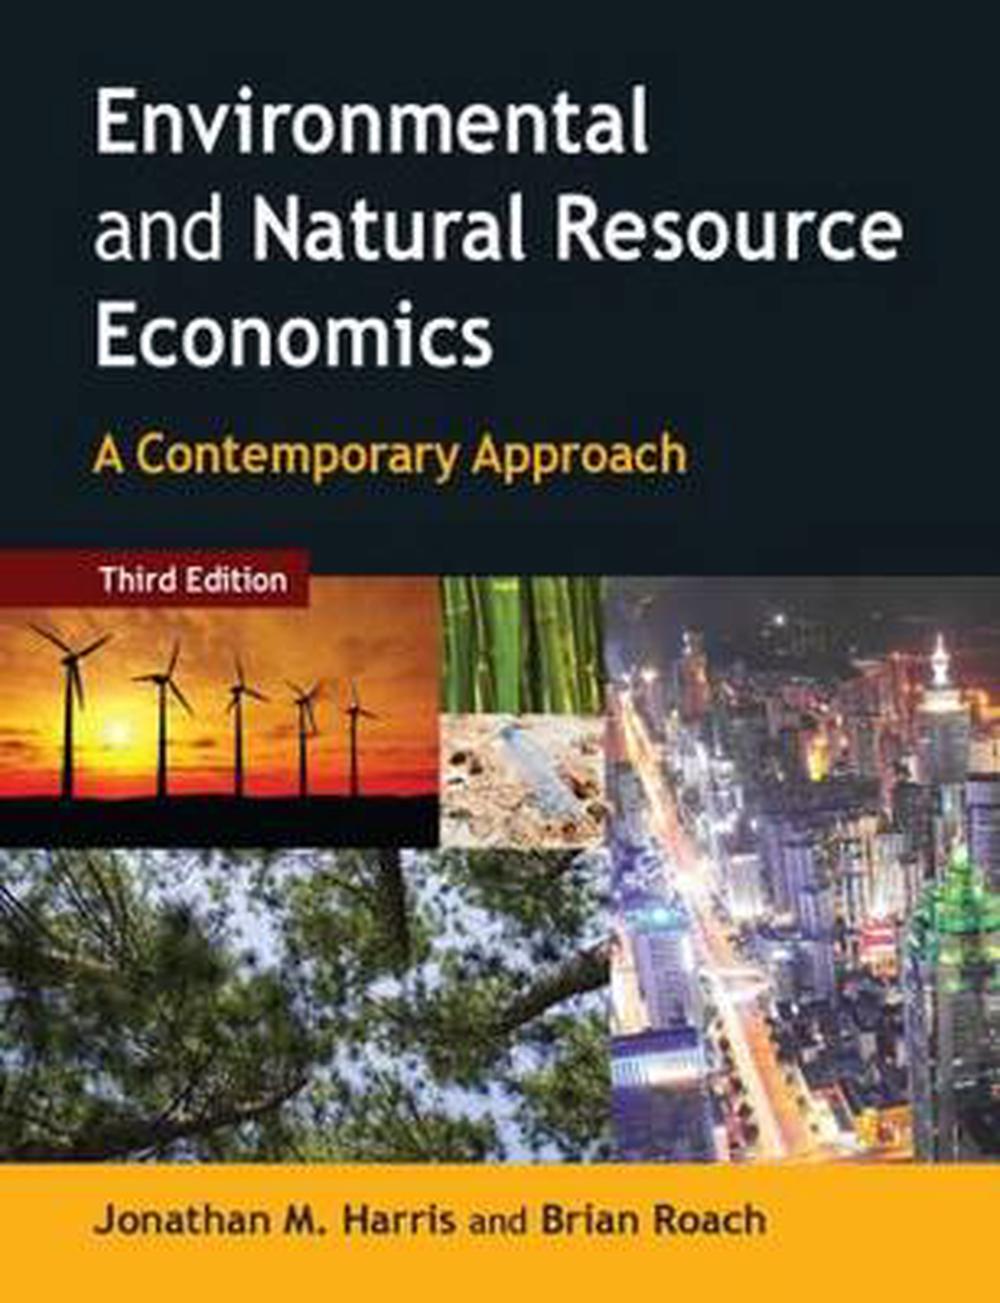 case study on natural resource management